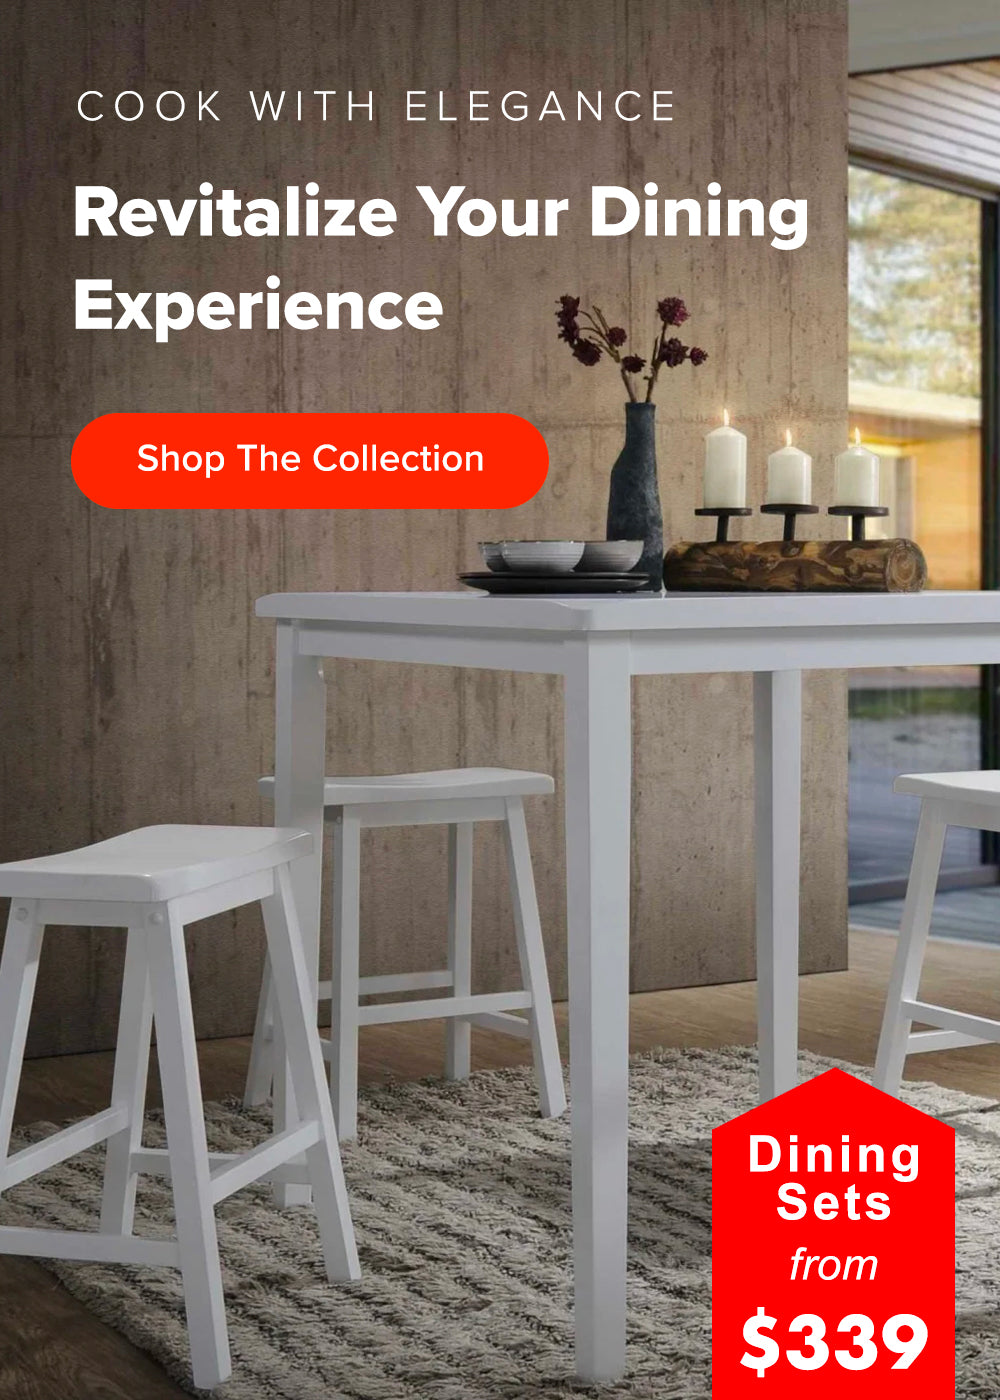 Cook with Elegance - Revitalize Your Dining Experience